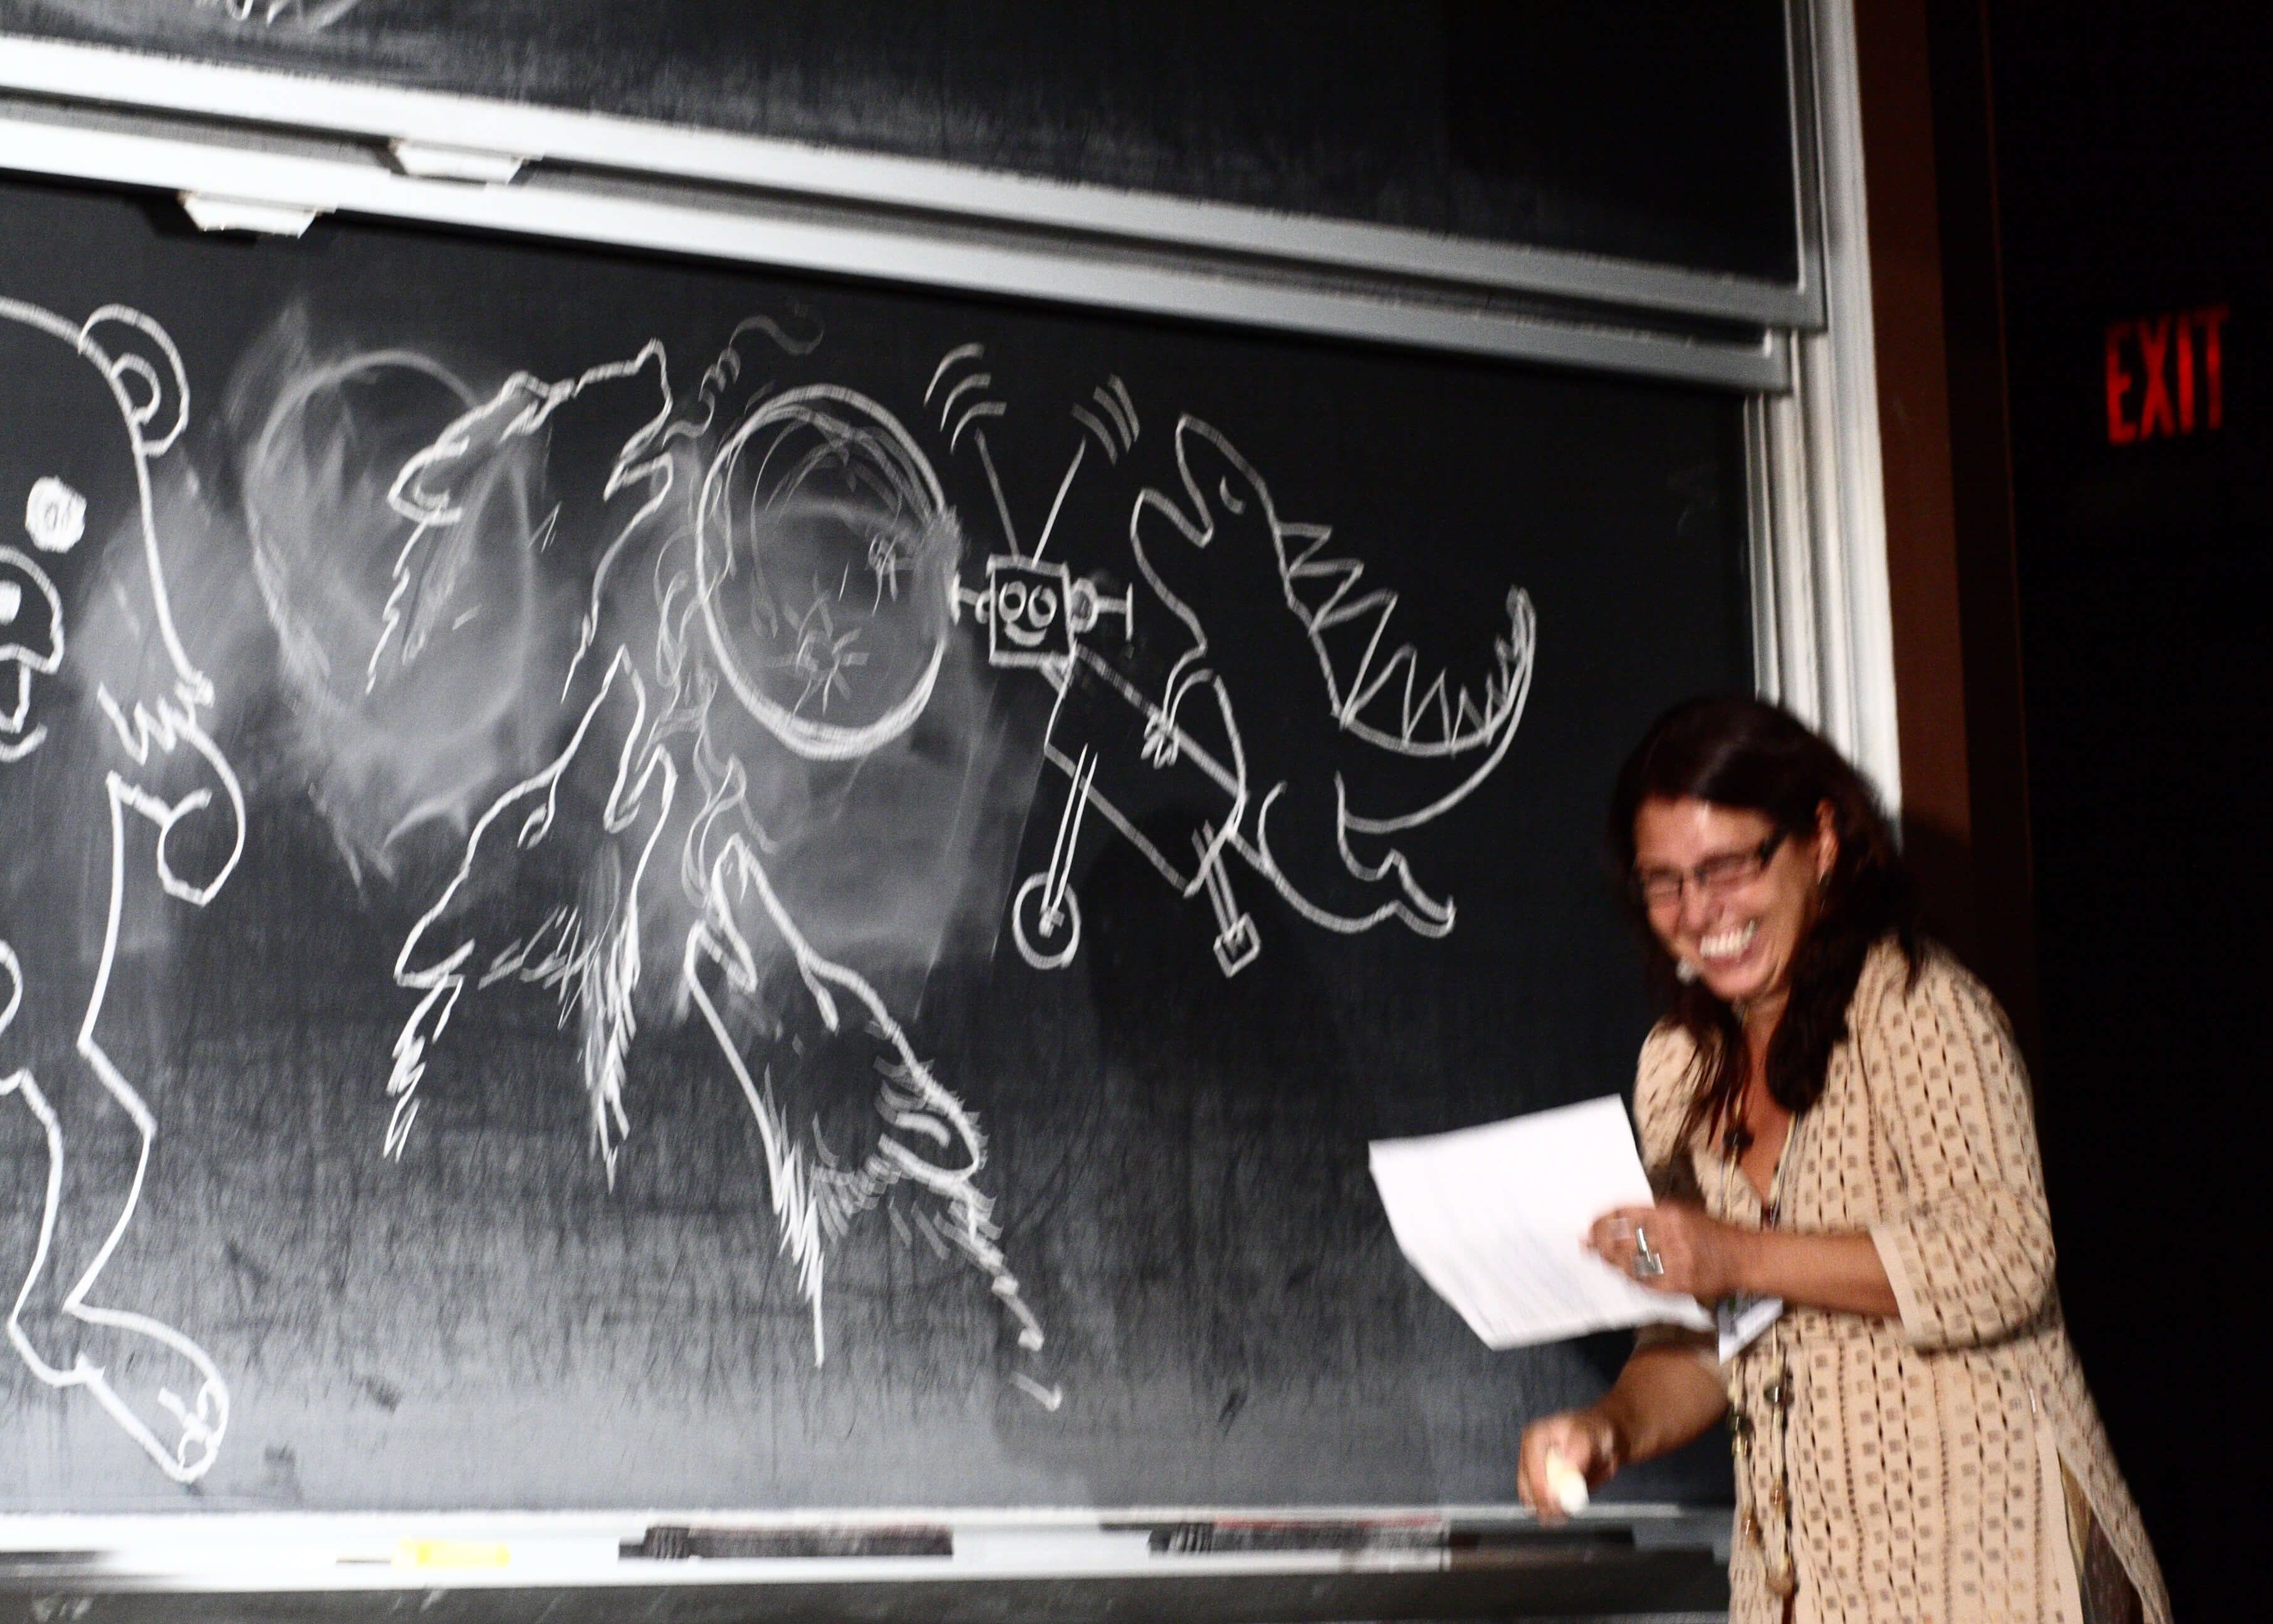 Antonia sat humorously on the board - wolves howl at the full moon. From wikimedia commons